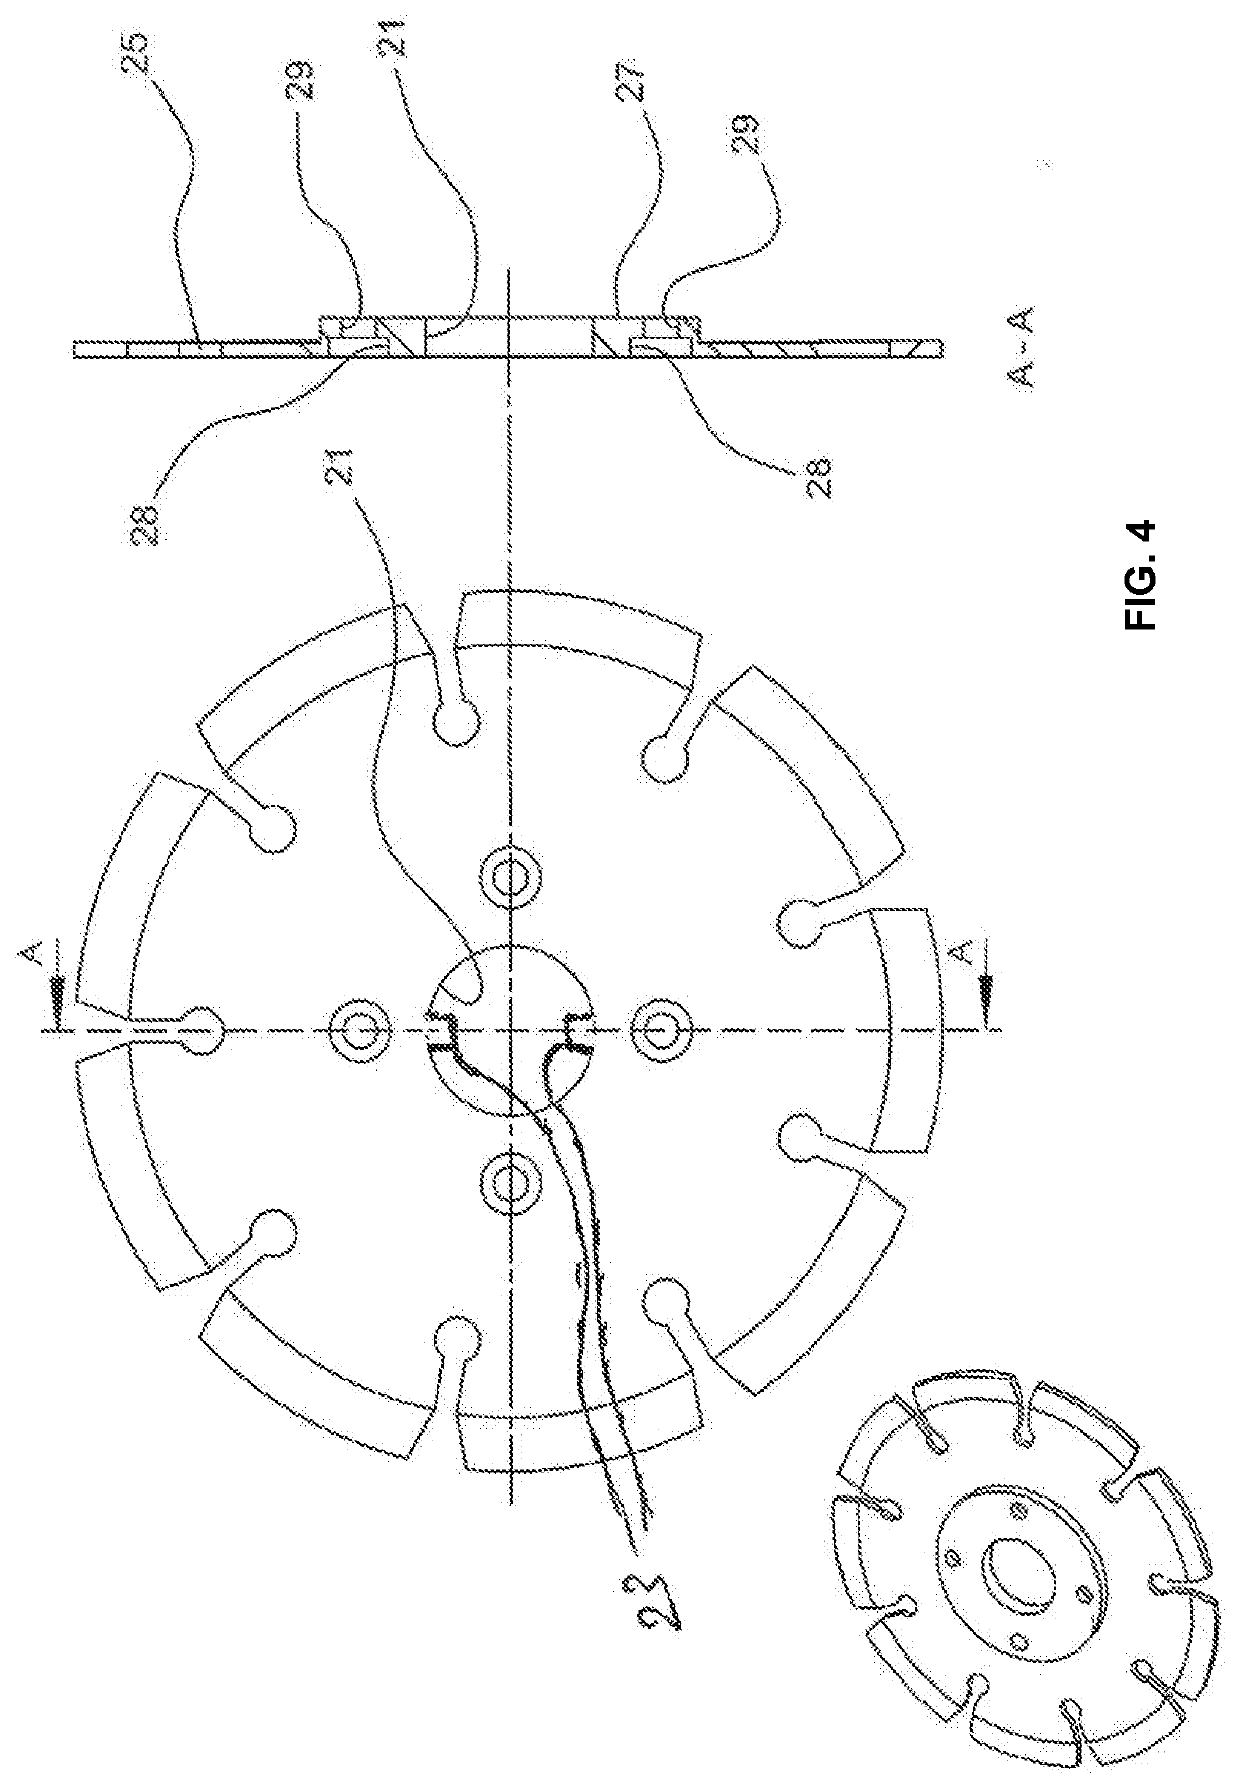 Tool and device for removal of material on surfaces